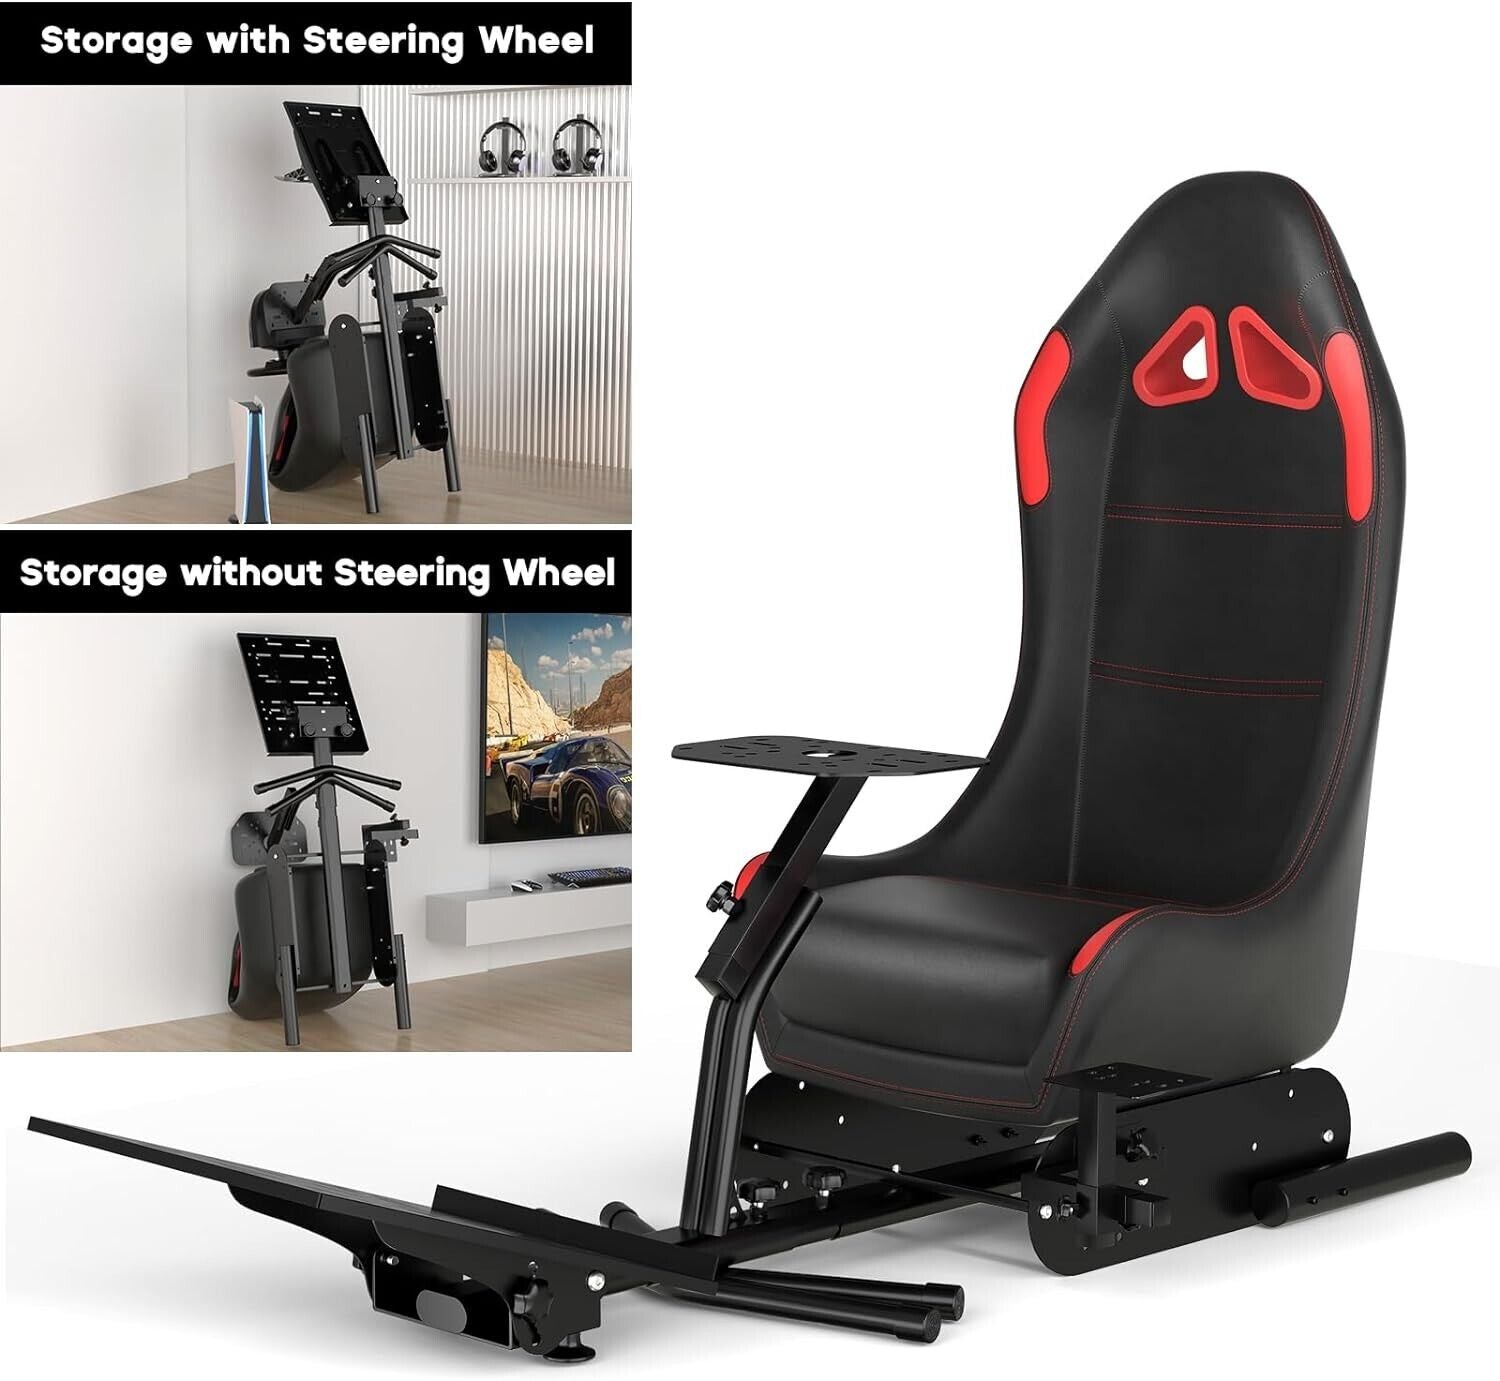 DS Driving Game Sim Racing Frame Rig & Seat - Wheel Pedals Xbox PS PC Console F1